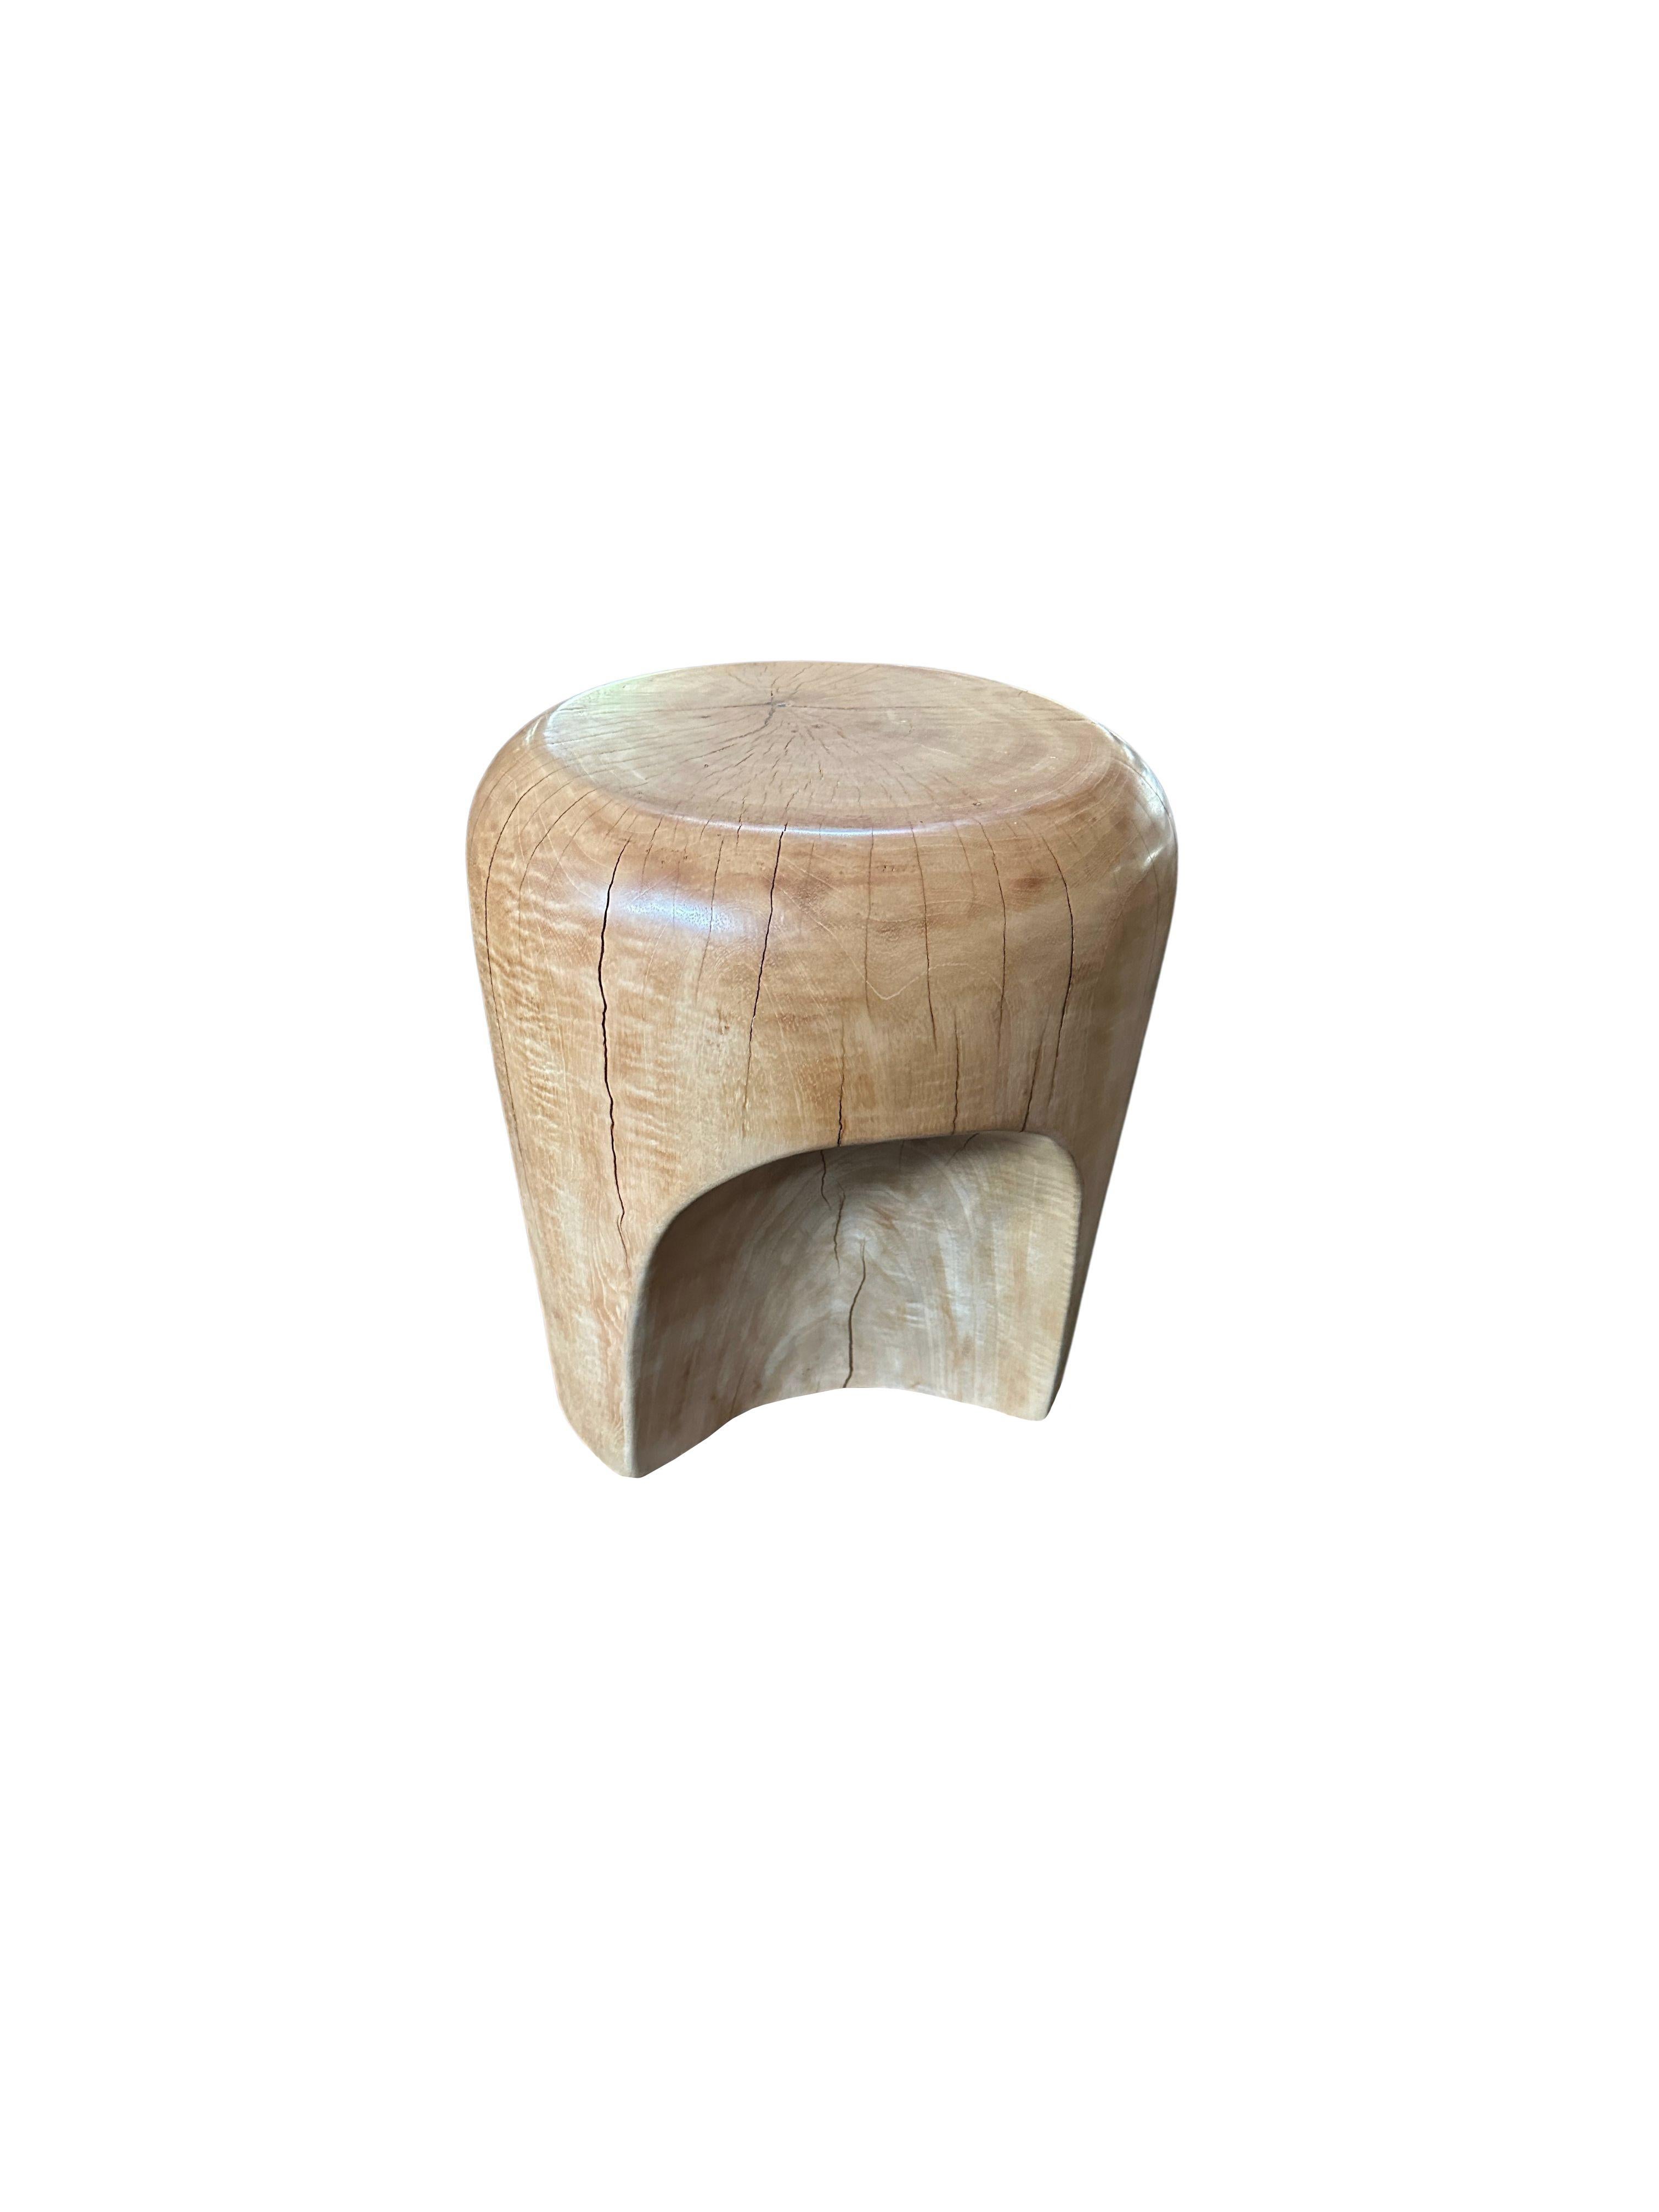 Indonesian Sculptural Mango Wood Side Table, Hand-Crafted Modern Organic For Sale